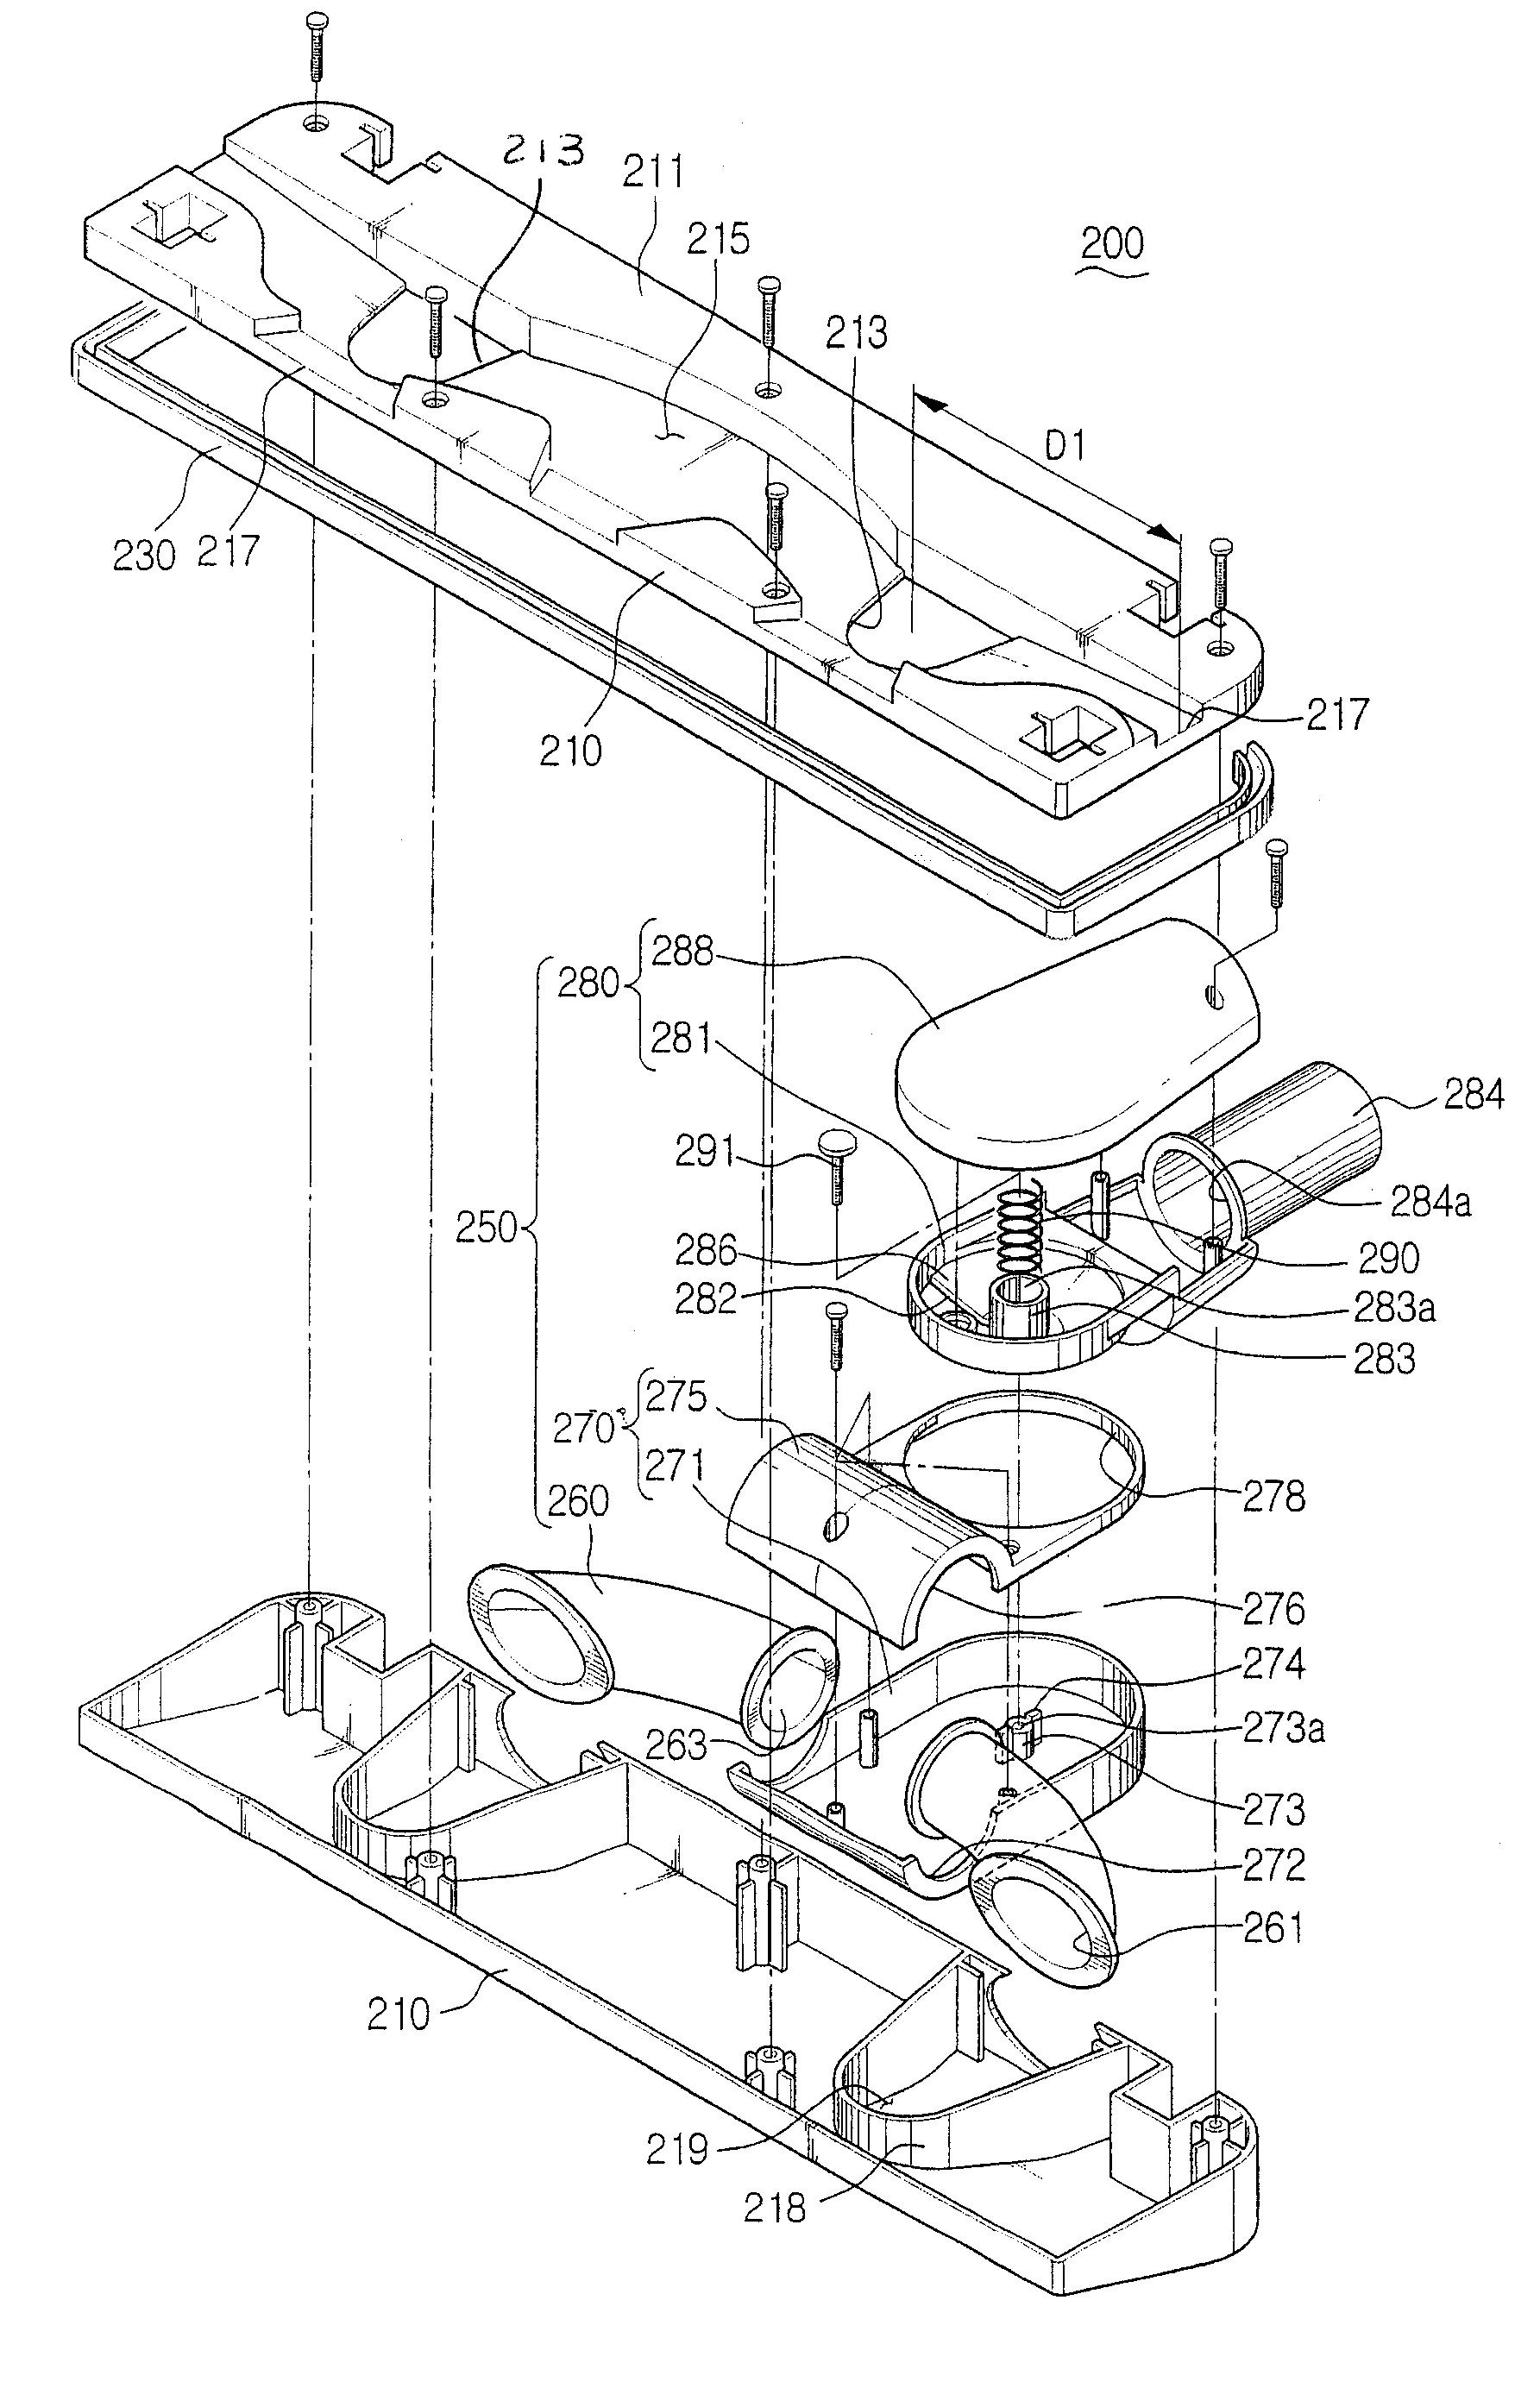 Vacuum cleaner with articulated suction port assembly